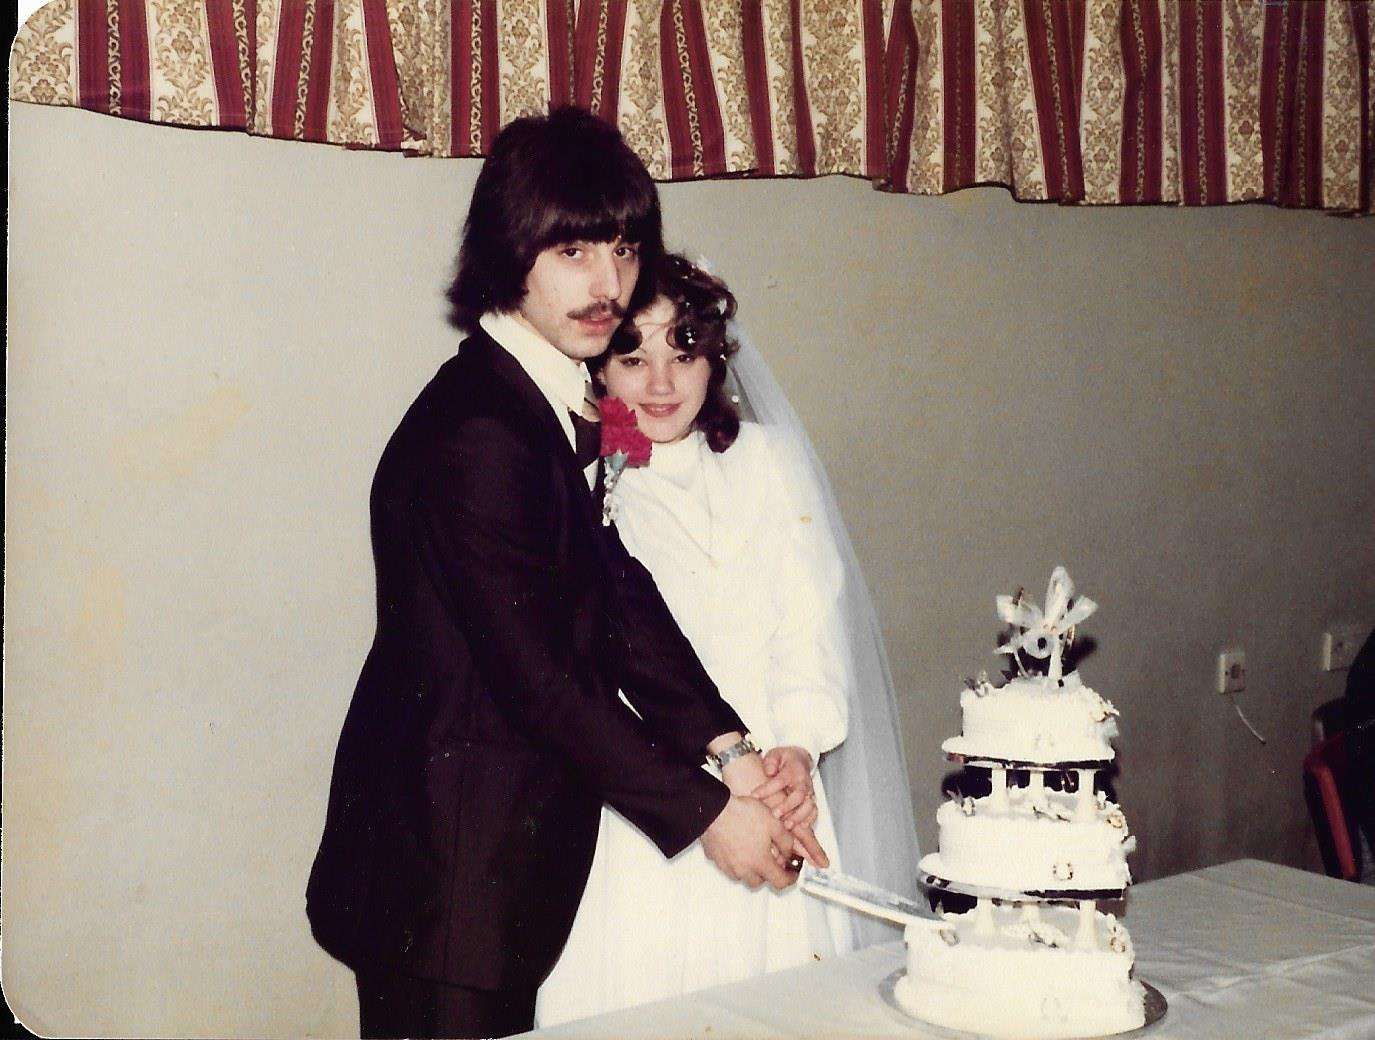 Andrew and Paula Meade on their wedding day